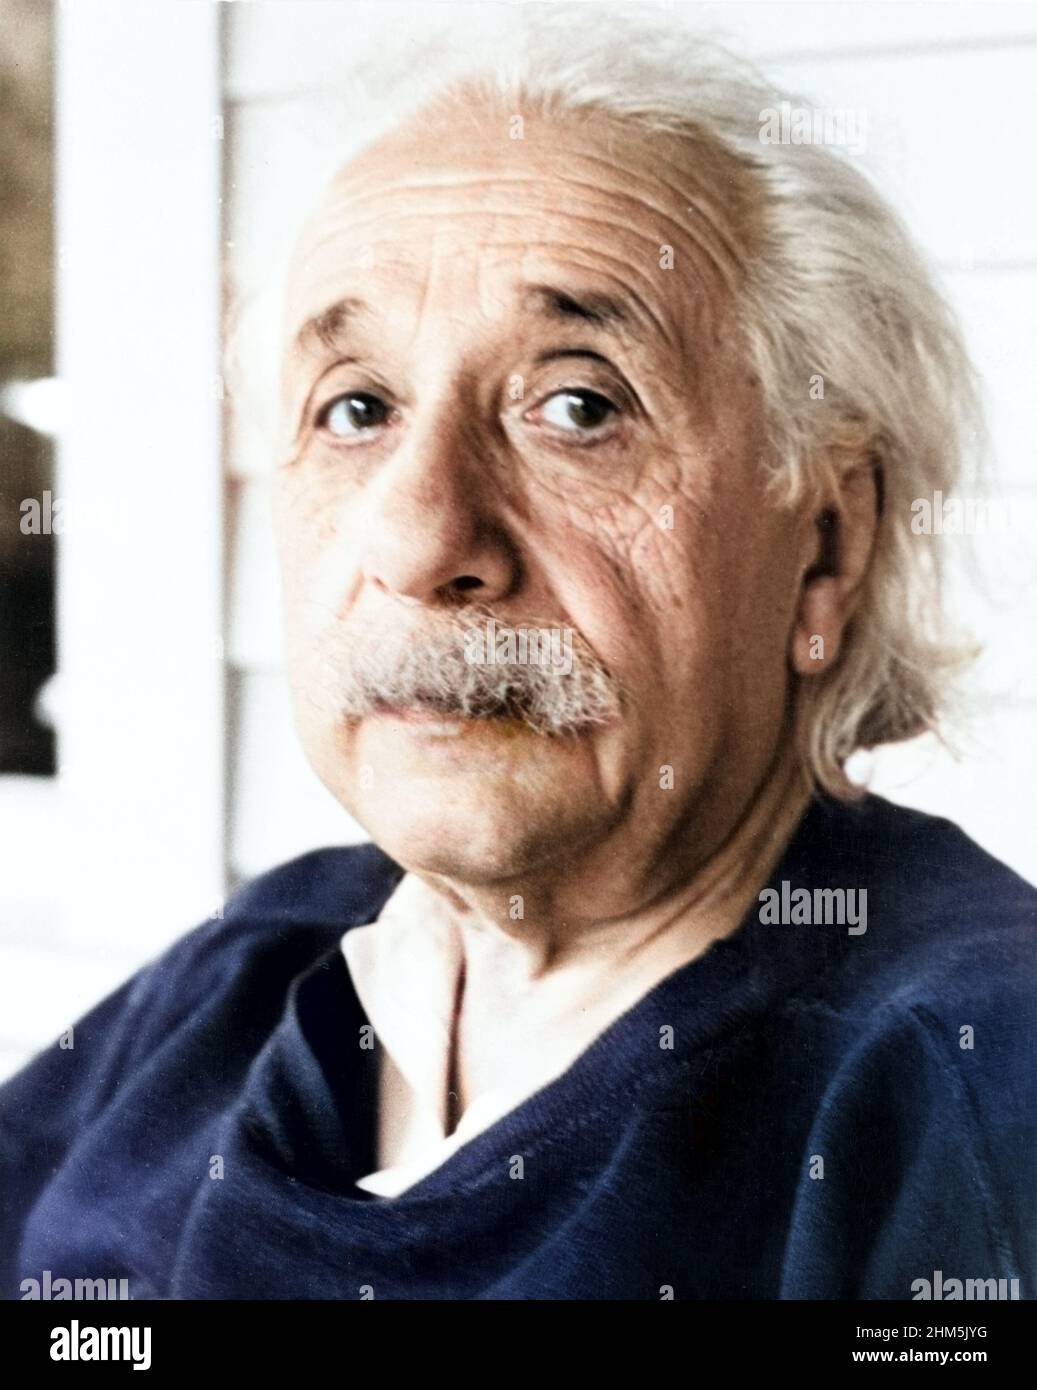 The genius Albert Einstein (1879-1955) portrait in his later years (probably 1950s). Photo by John D. Schiff. Colorized photo. Stock Photo